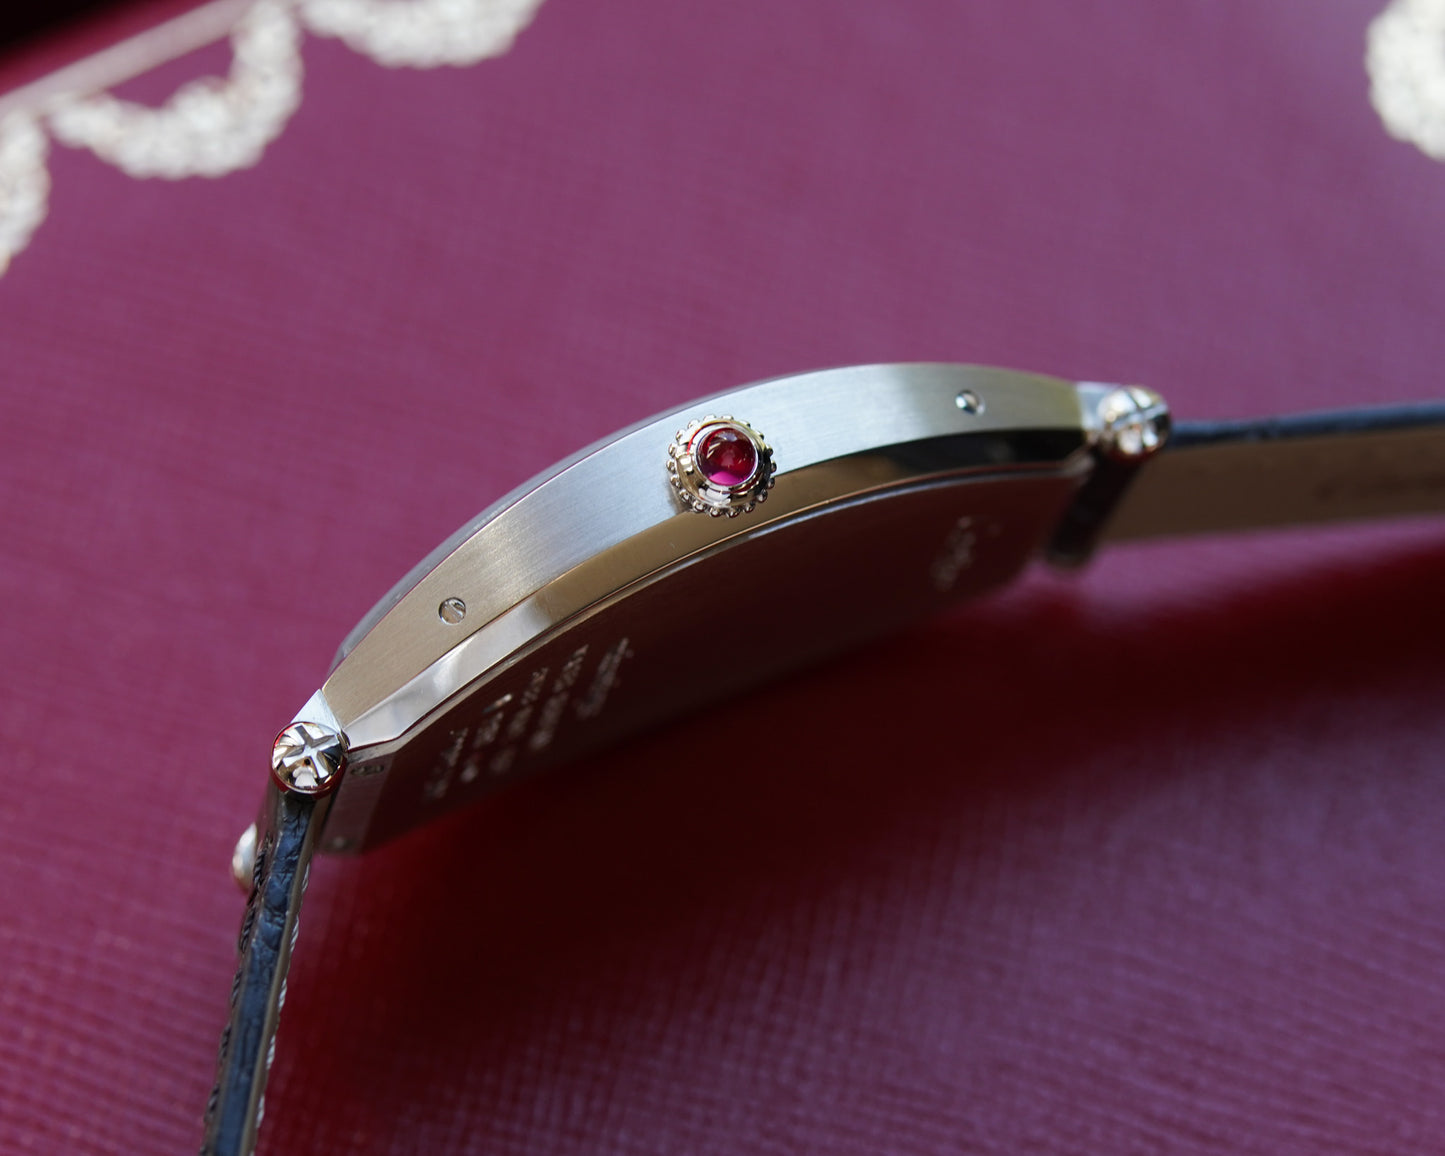 Cartier Tonneau Platinum from Collection Prive, limited edition 100 pieces